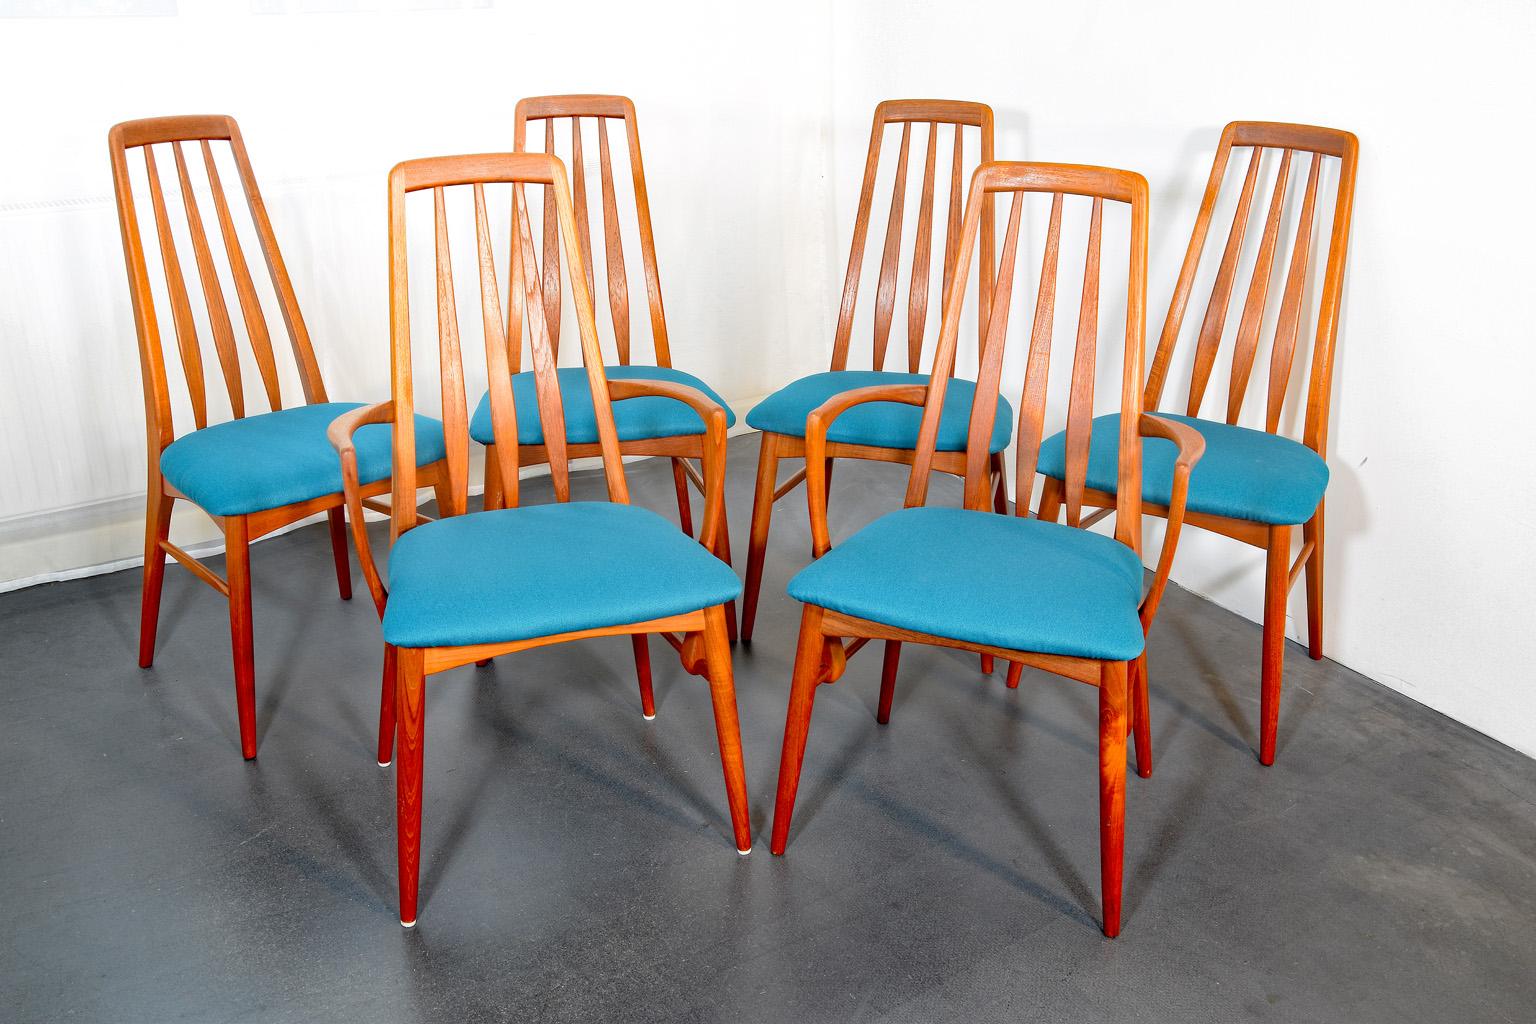 Eva chairs by Niels Koefoed for Koefoed Hornslet, set of 6. Teak and new fabric cover petrol color, Denmark, 1960s.
Dimensions: Chair 47cm, armchairs 53cm.